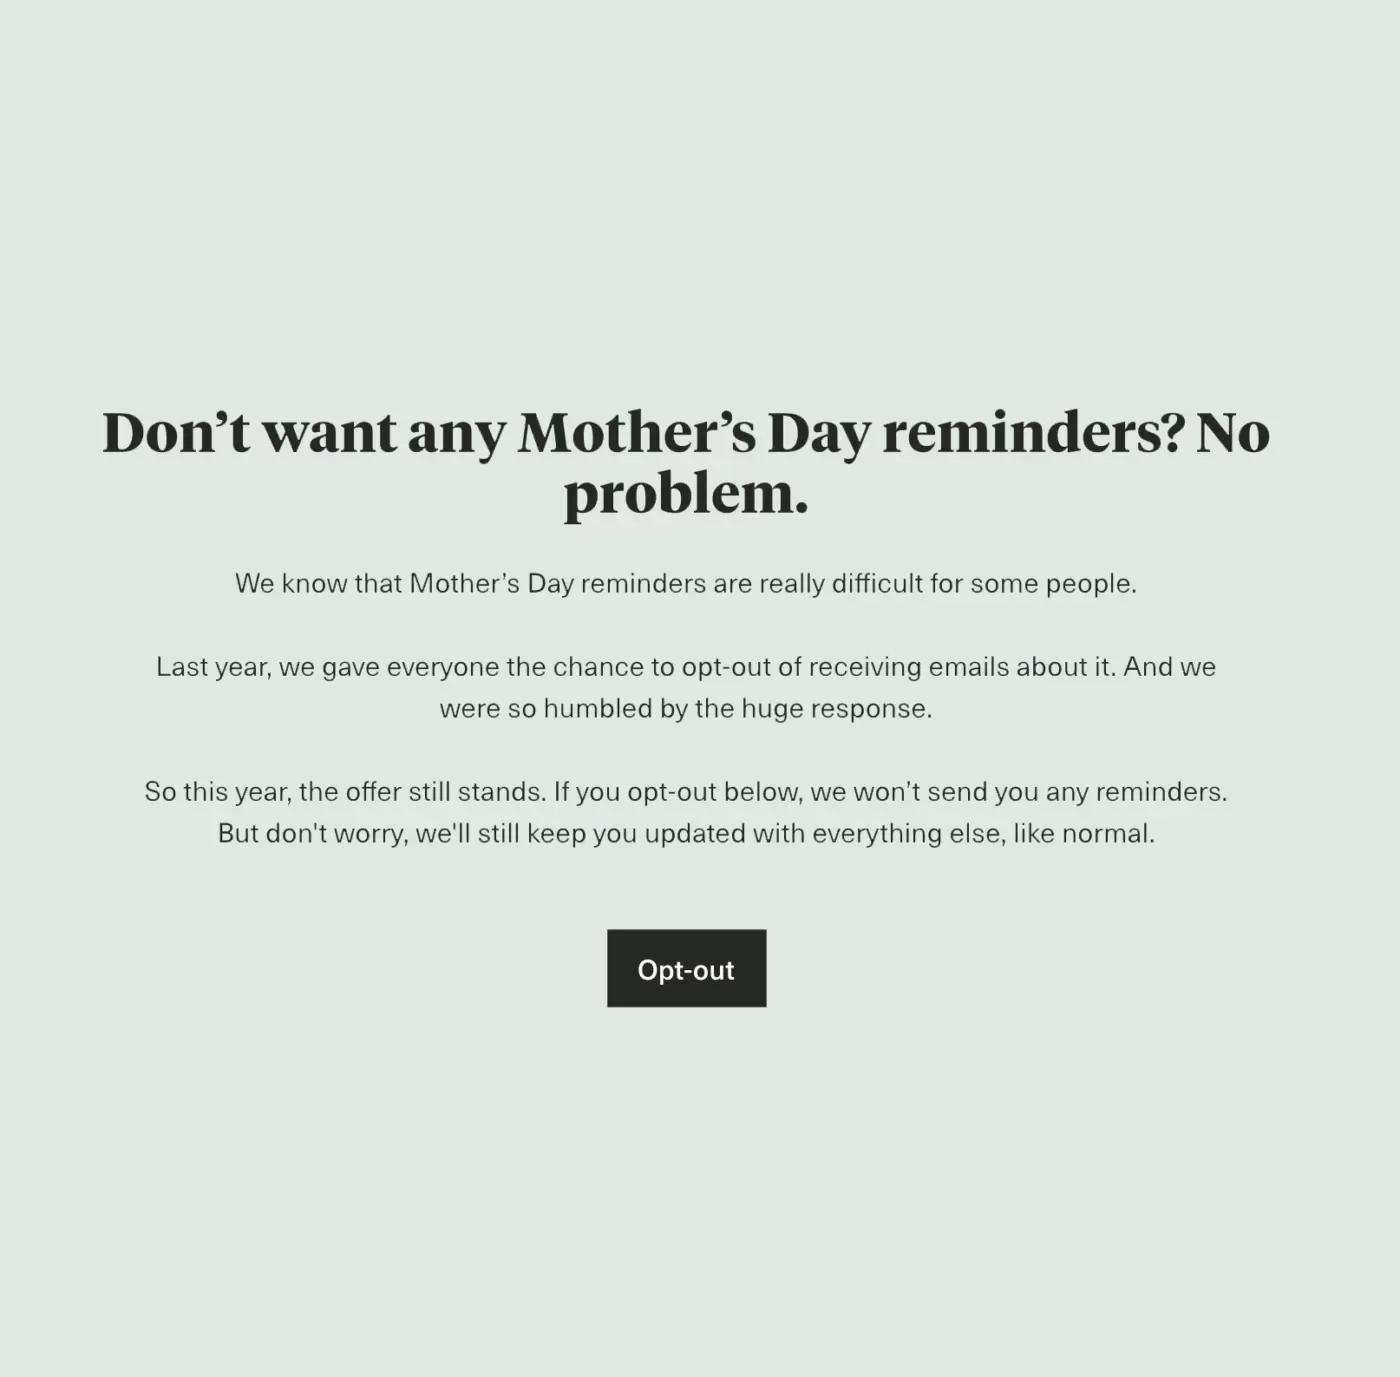 Don't want any Mother's Day reminders message from Bloom & Wild 